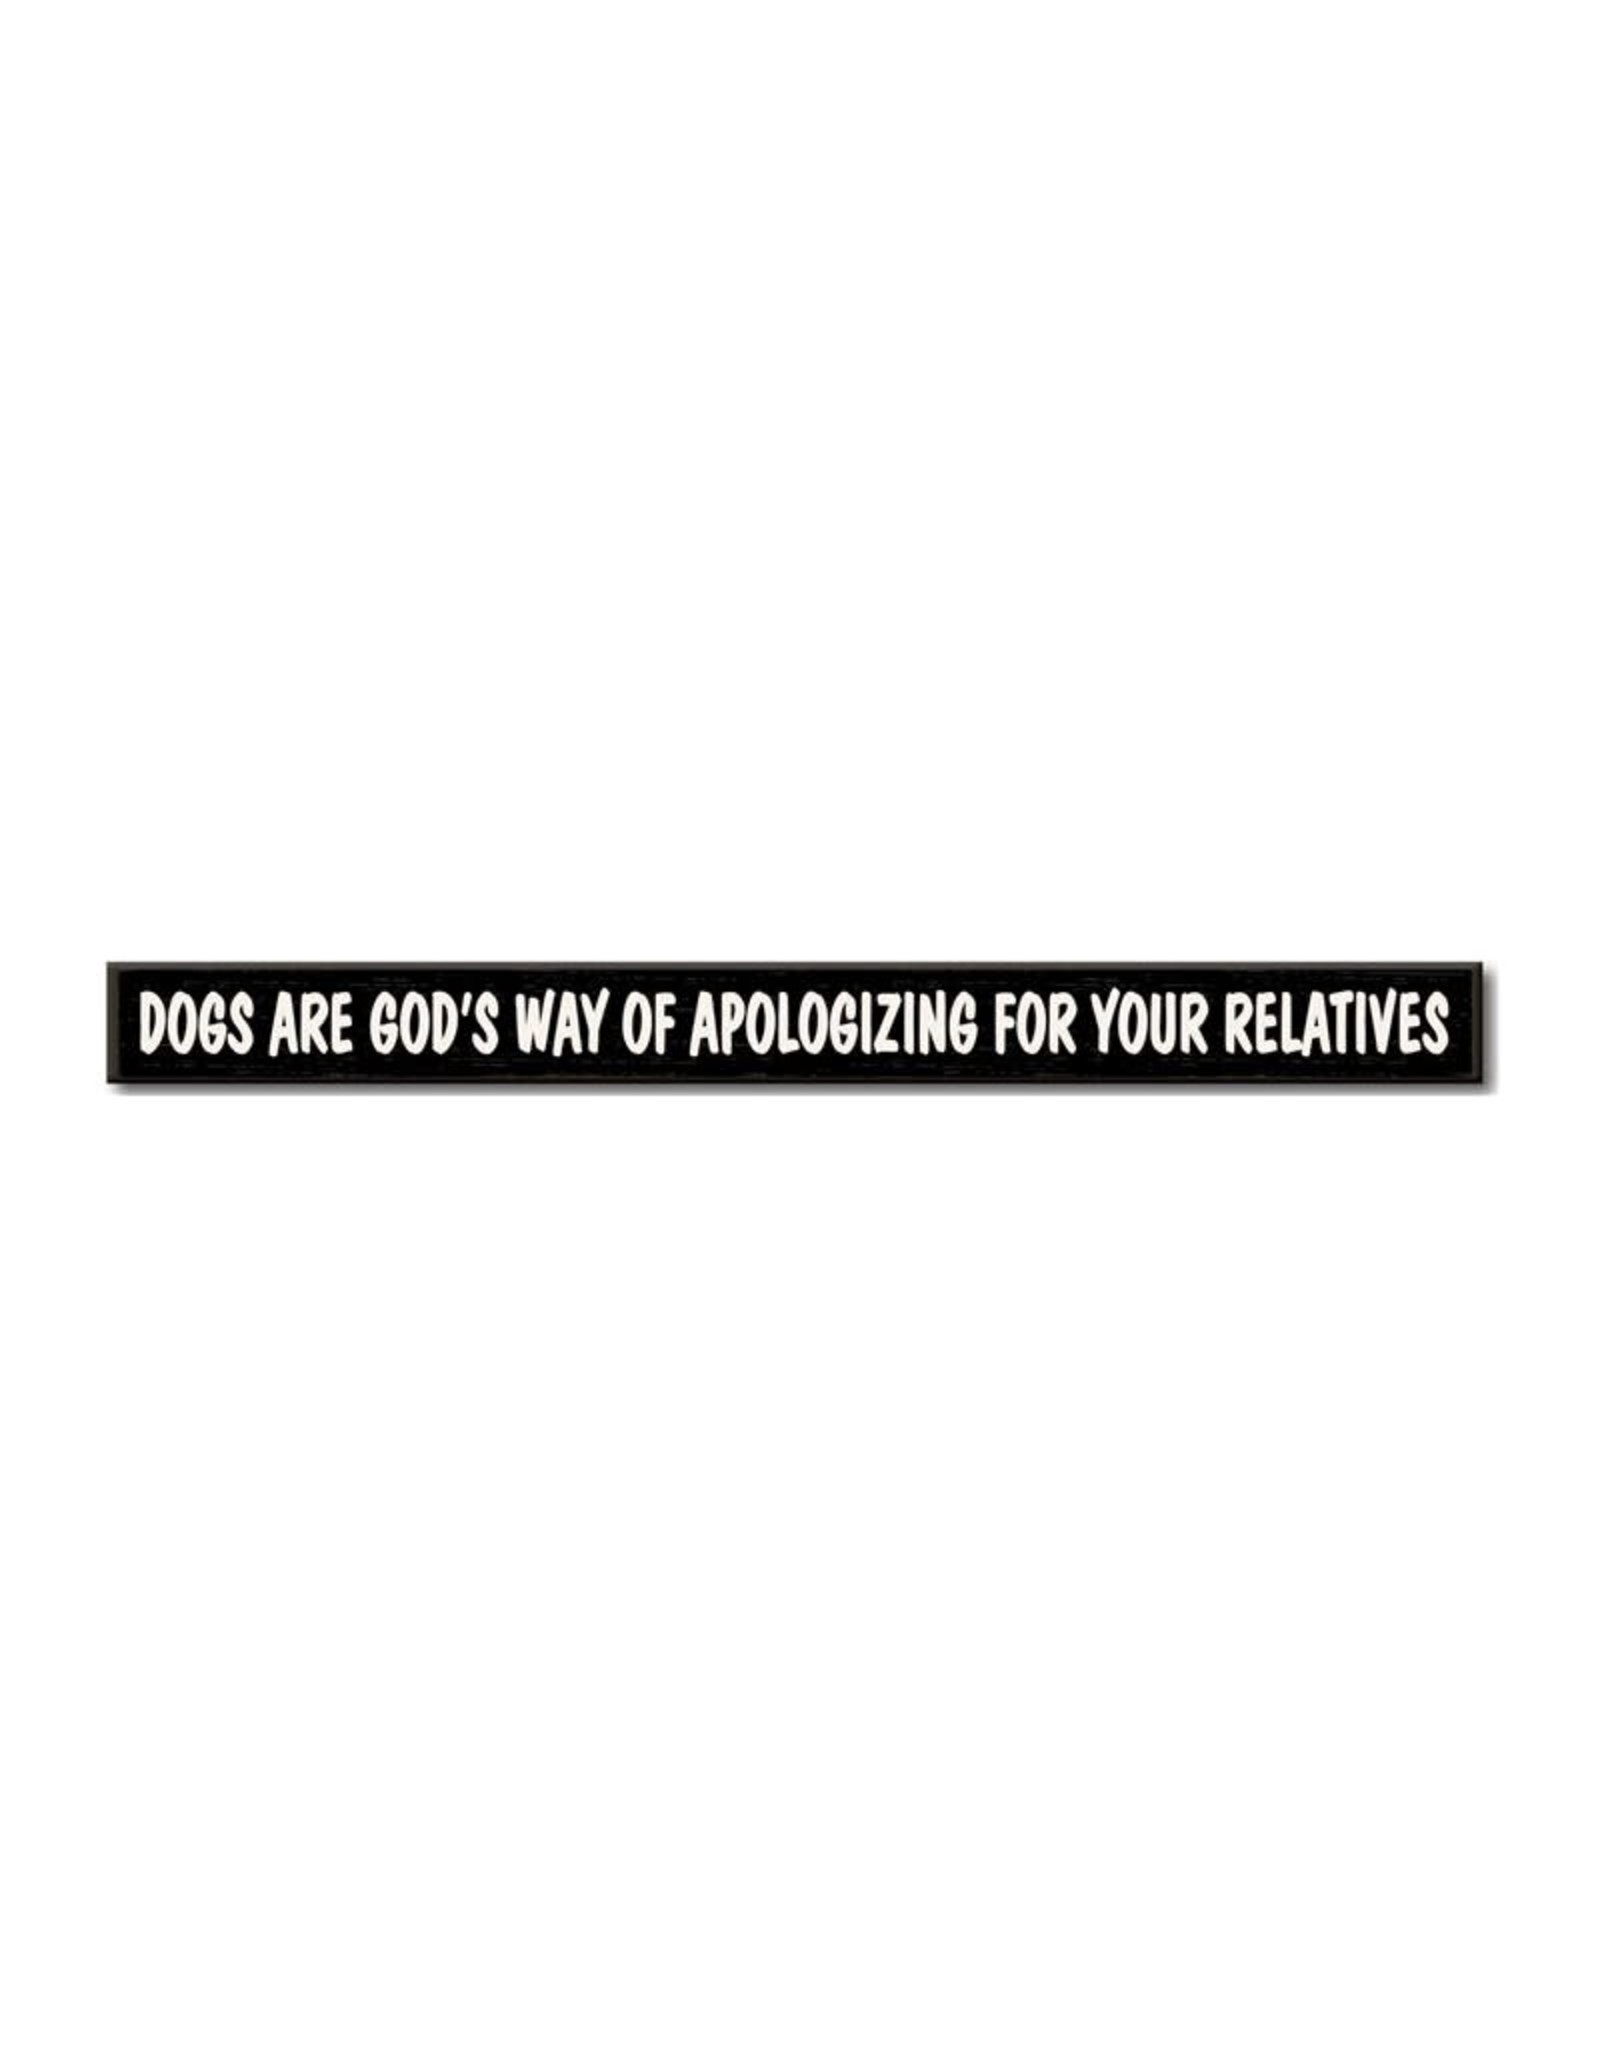 Dogs/Apologizing for Relatives - Skinnies 1.5x16